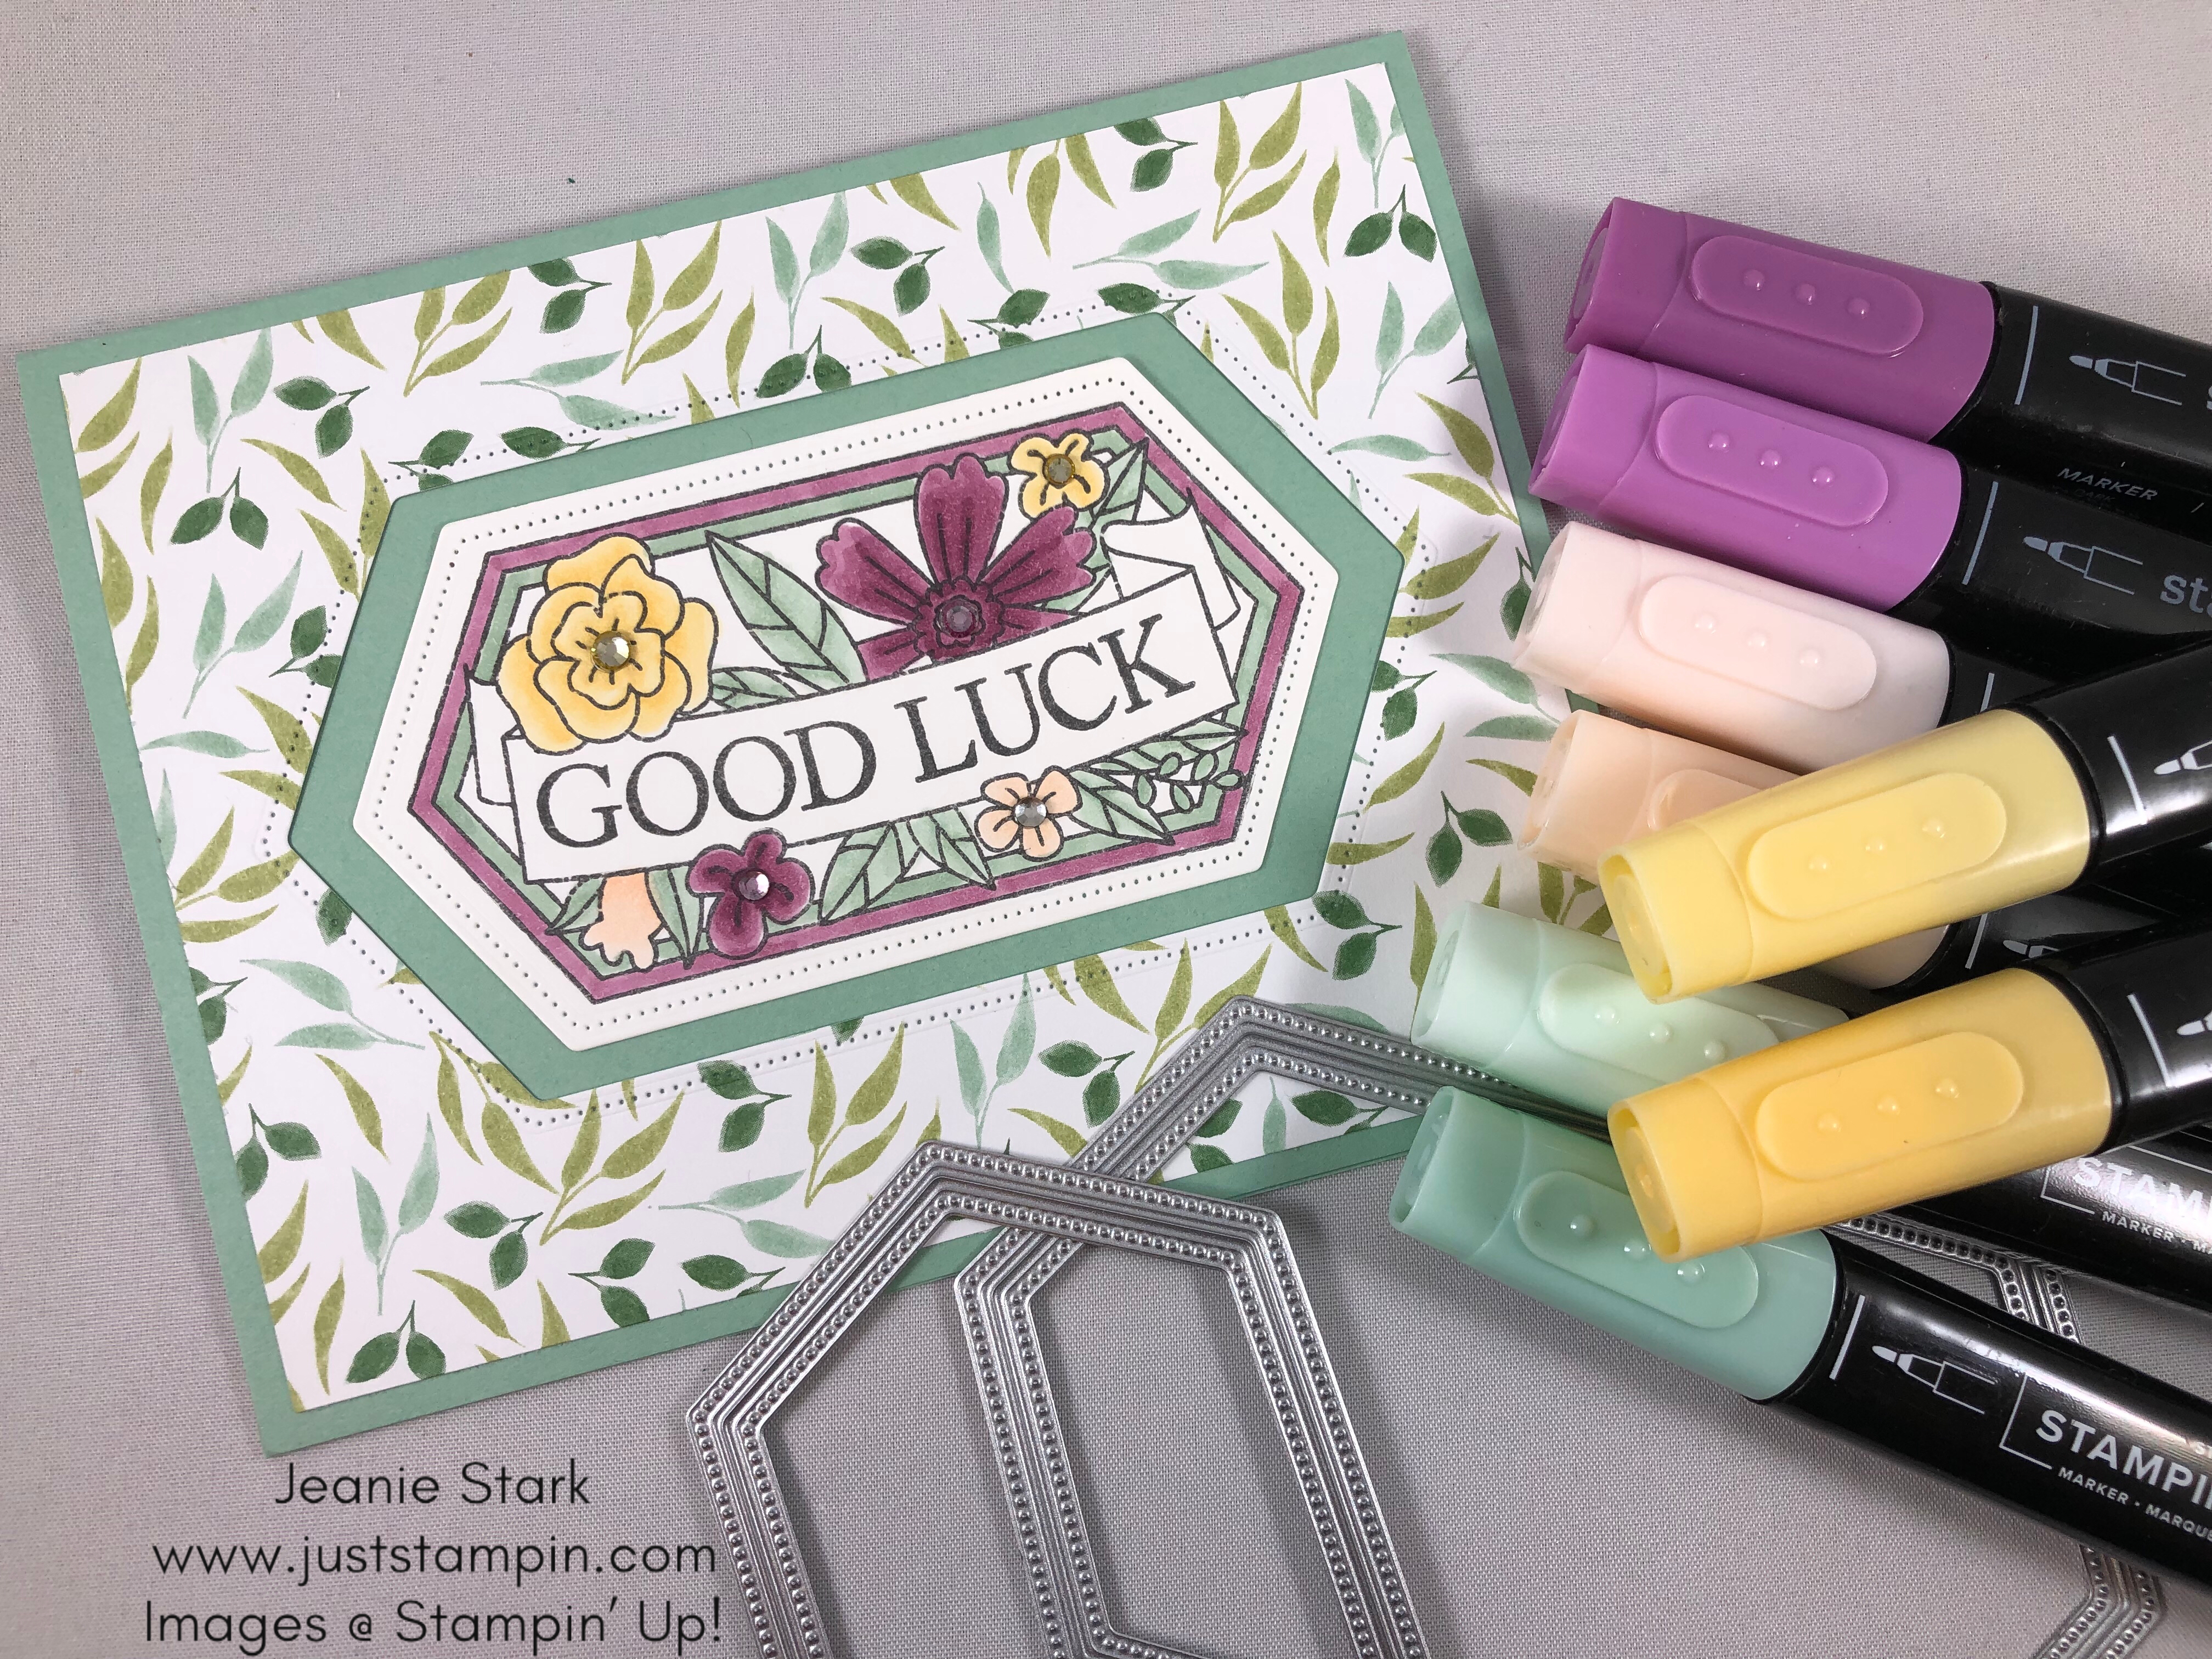 Stampin' Up! Believe You Can Good Luck card idea - Jeanie Stark StampinUp